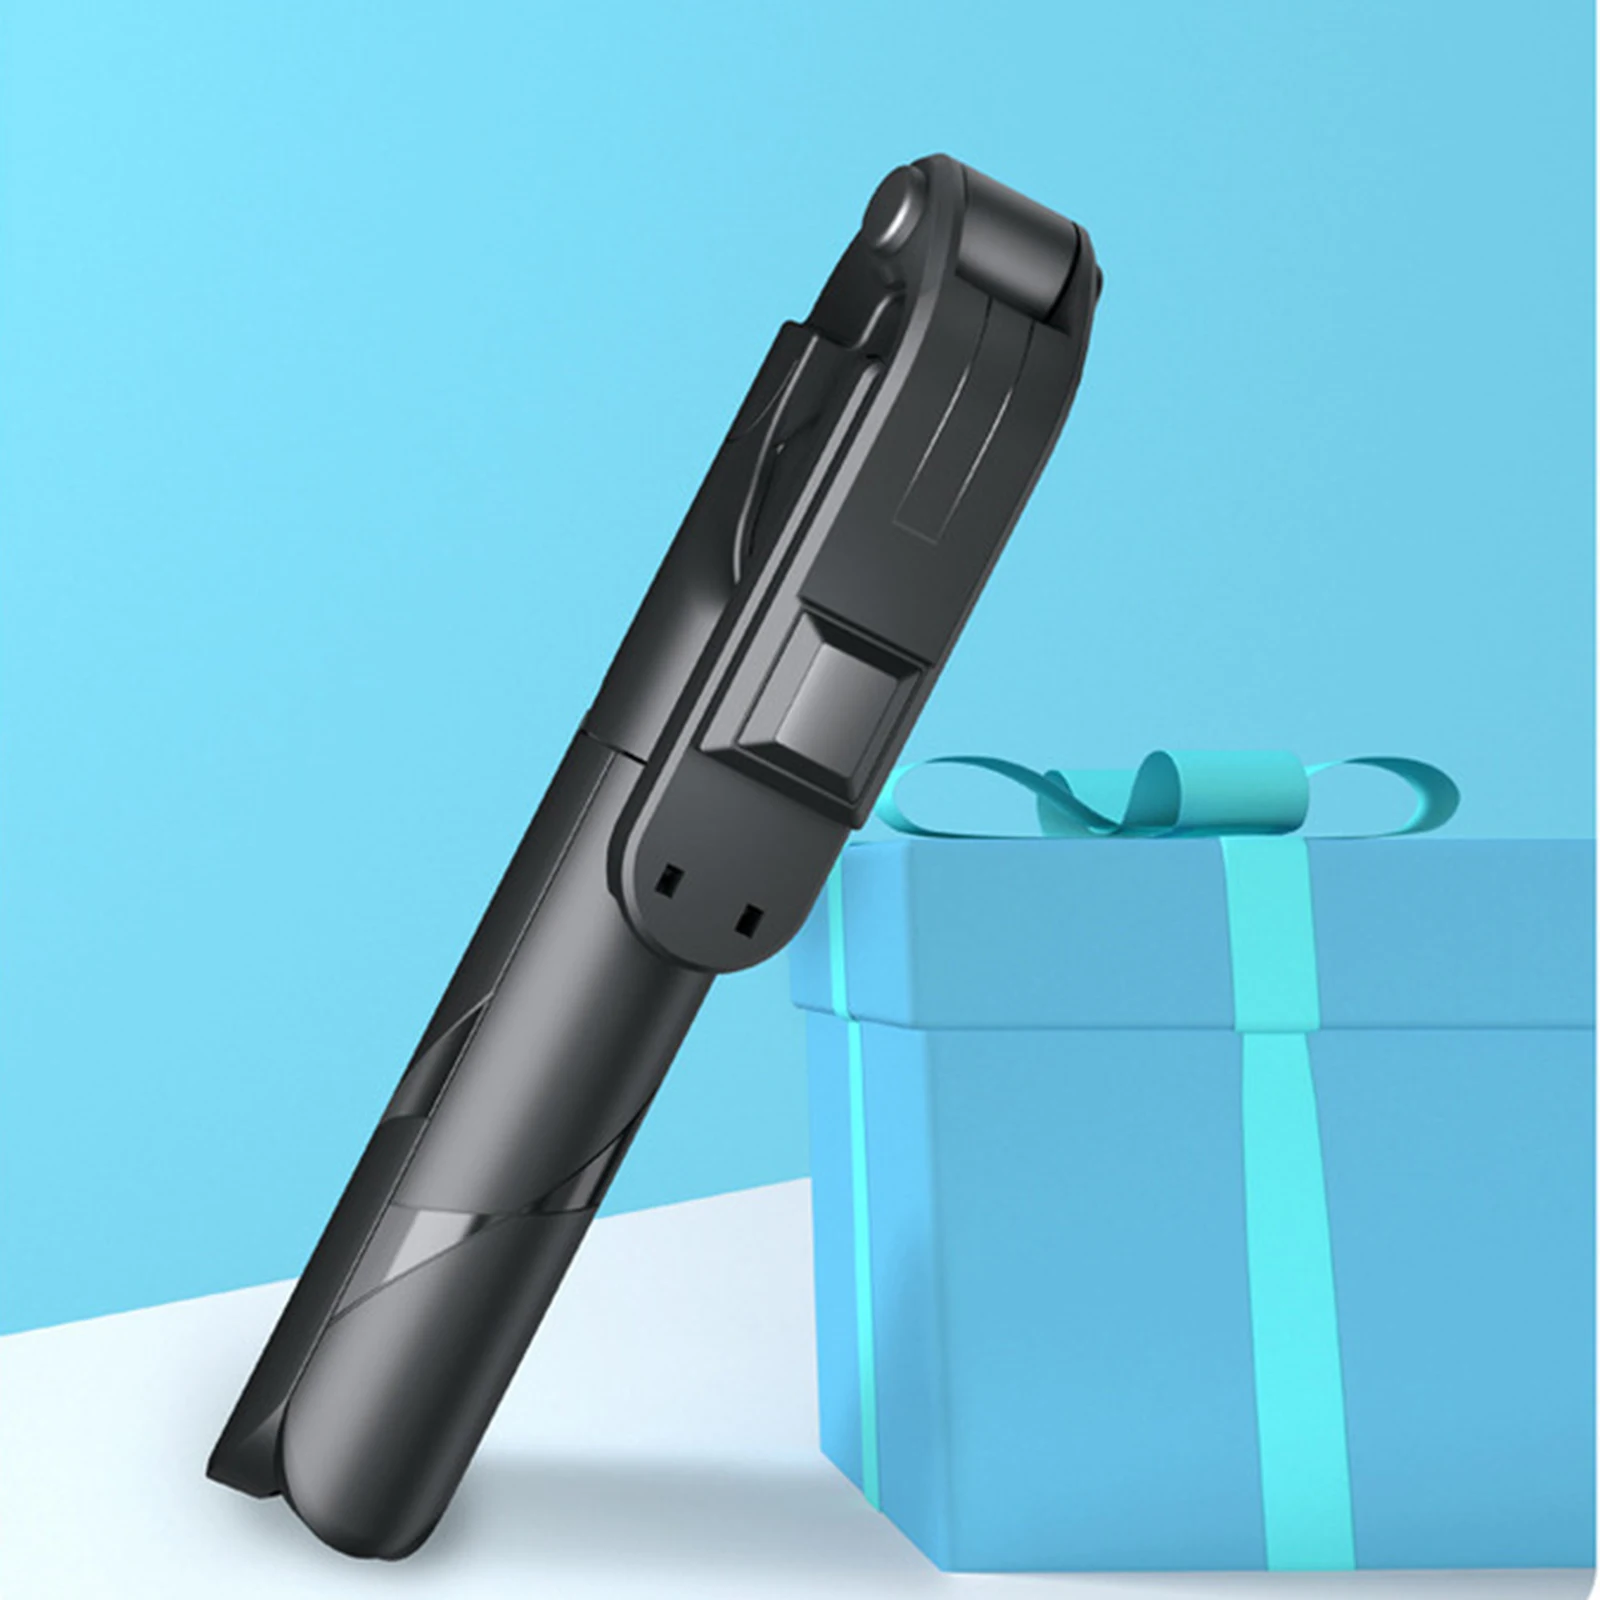 Bluetooth Selfie Stick, Handheld Extendable Phone Tripod Gimbal Anti-Shaking Stabilizer for  11 Pro/XS Max/XS/XR/X/8/7/6